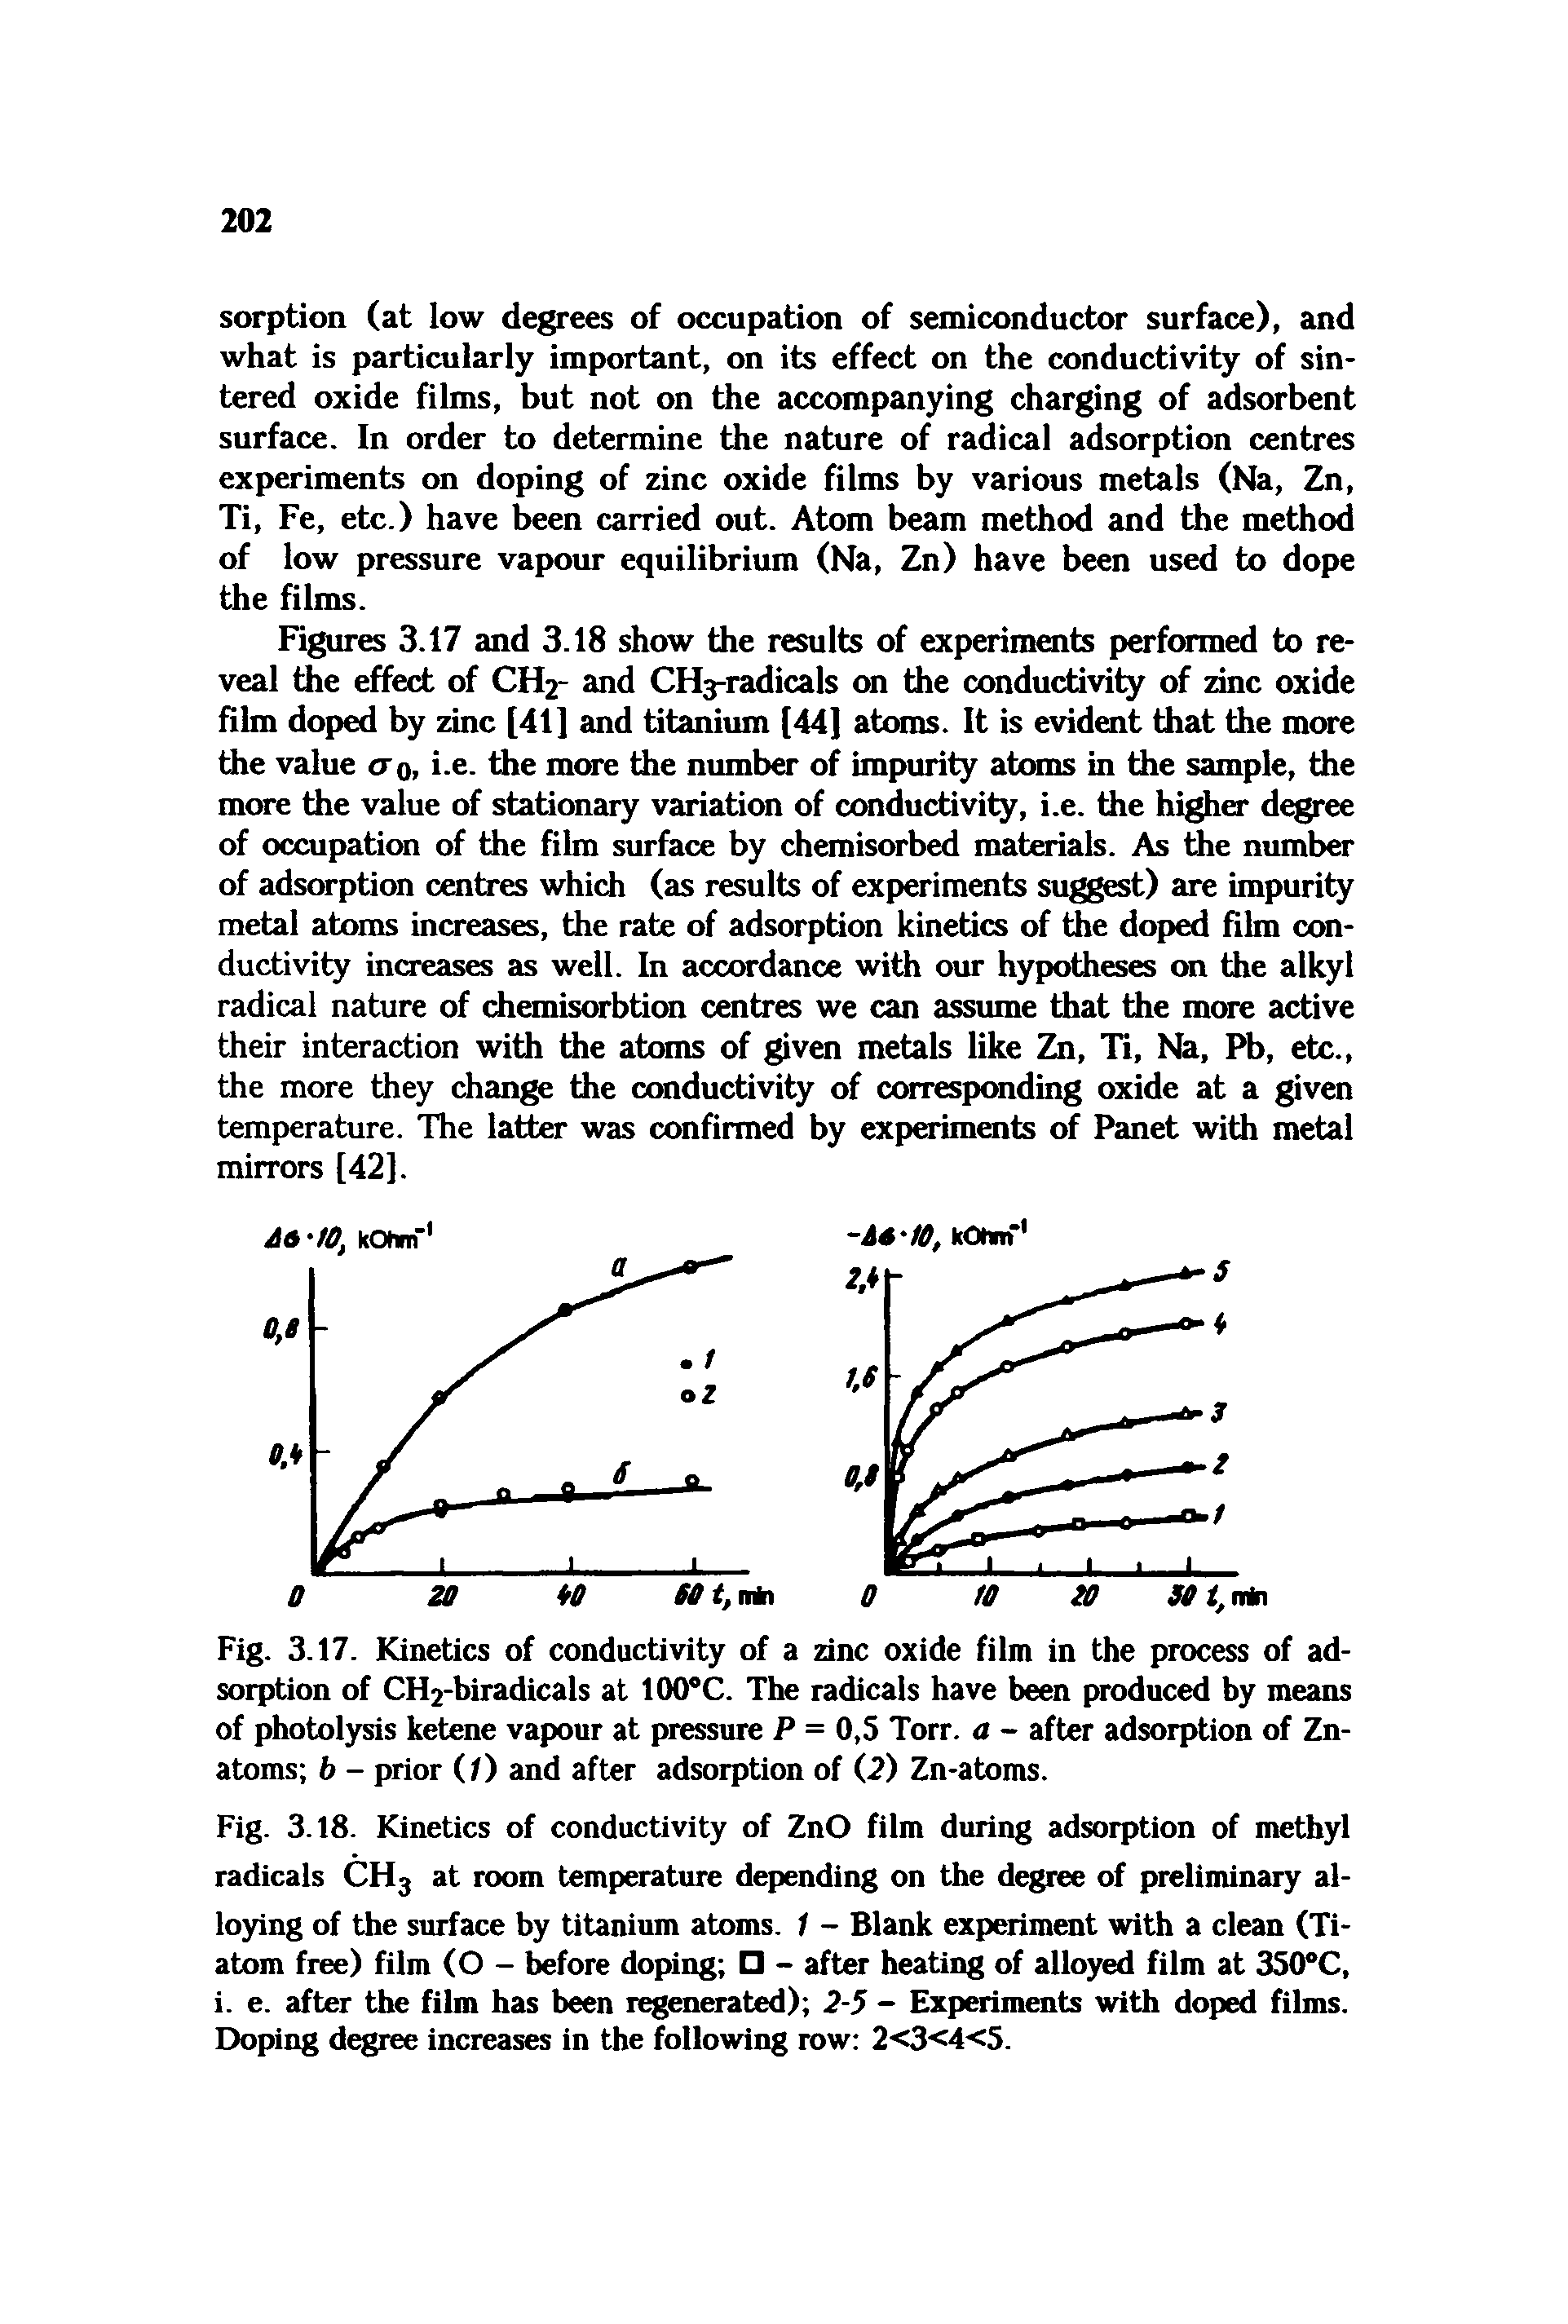 Fig. 3.18. Kinetics of conductivity of ZnO film during adsorption of methyl radicals CH3 at room temperature depending on the degree of preliminary alloying of the surface by titanium atoms. 1 - Blank experiment with a clean (Ti-atom free) film (O - before doping - after heating of alloyed film at 350 C, i. e. after the film has been regenerated) 2-5 - Experiments with doped films. Doping degree increases in the following row 2<3<4<5.